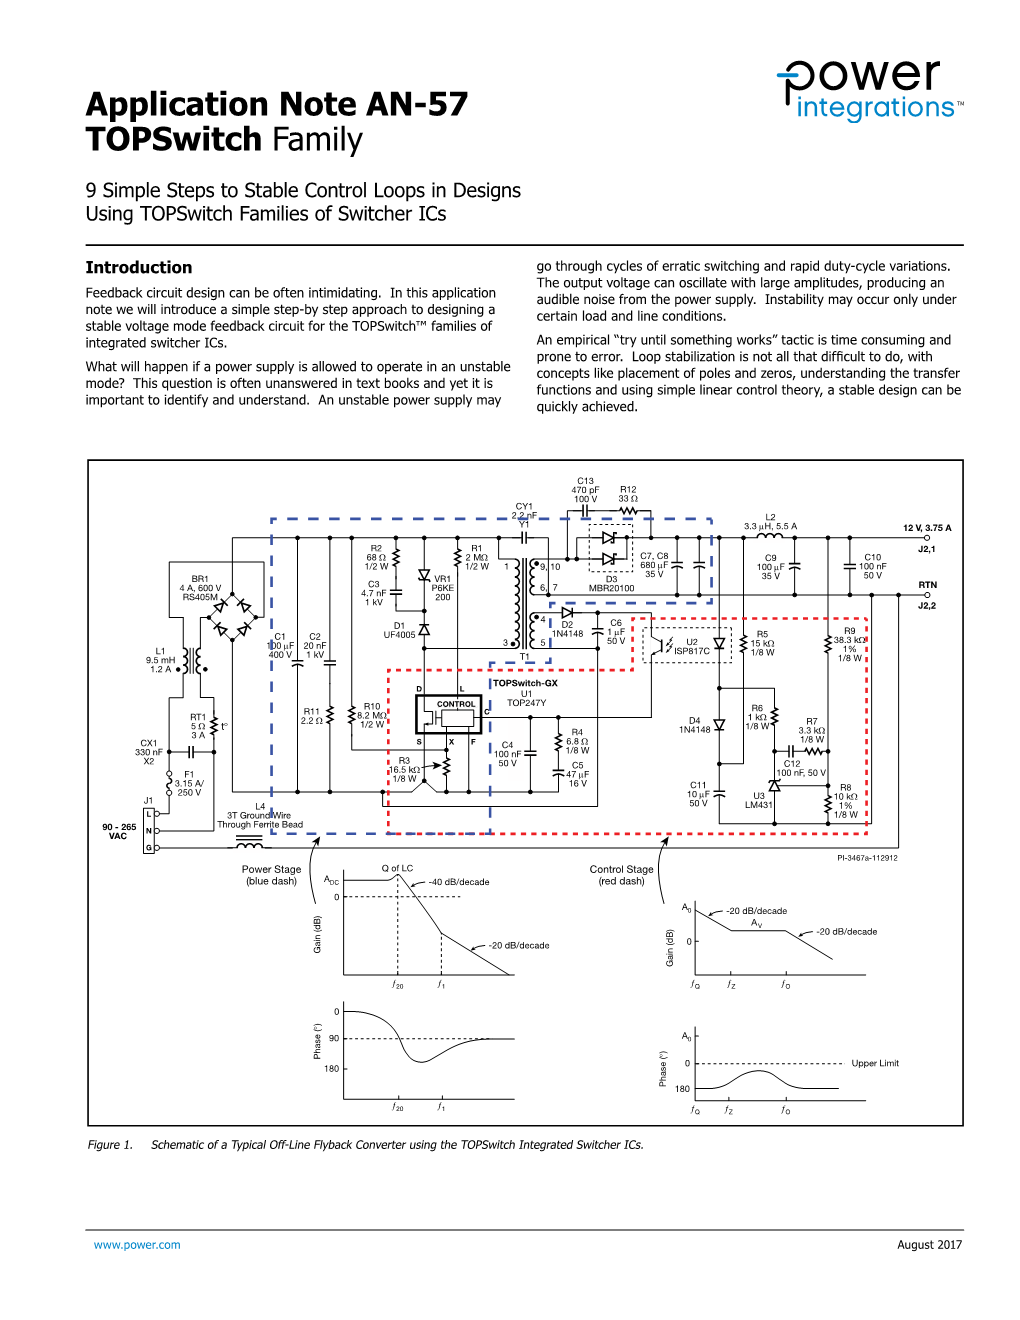 Application Note AN-57 Topswitch Family